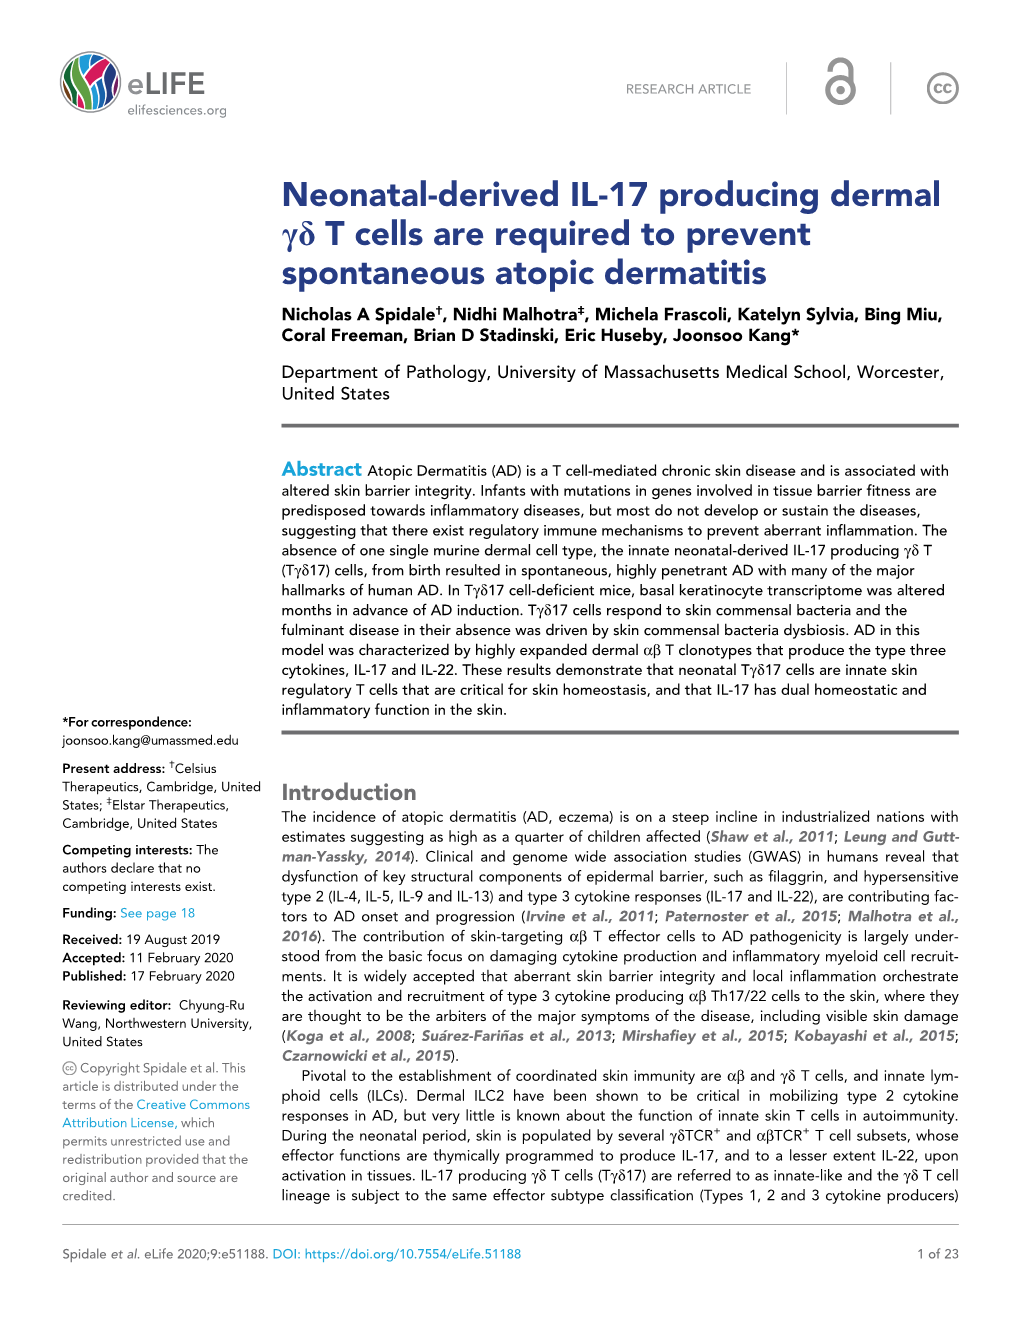 Neonatal-Derived IL-17 Producing Dermal Gd T Cells Are Required To